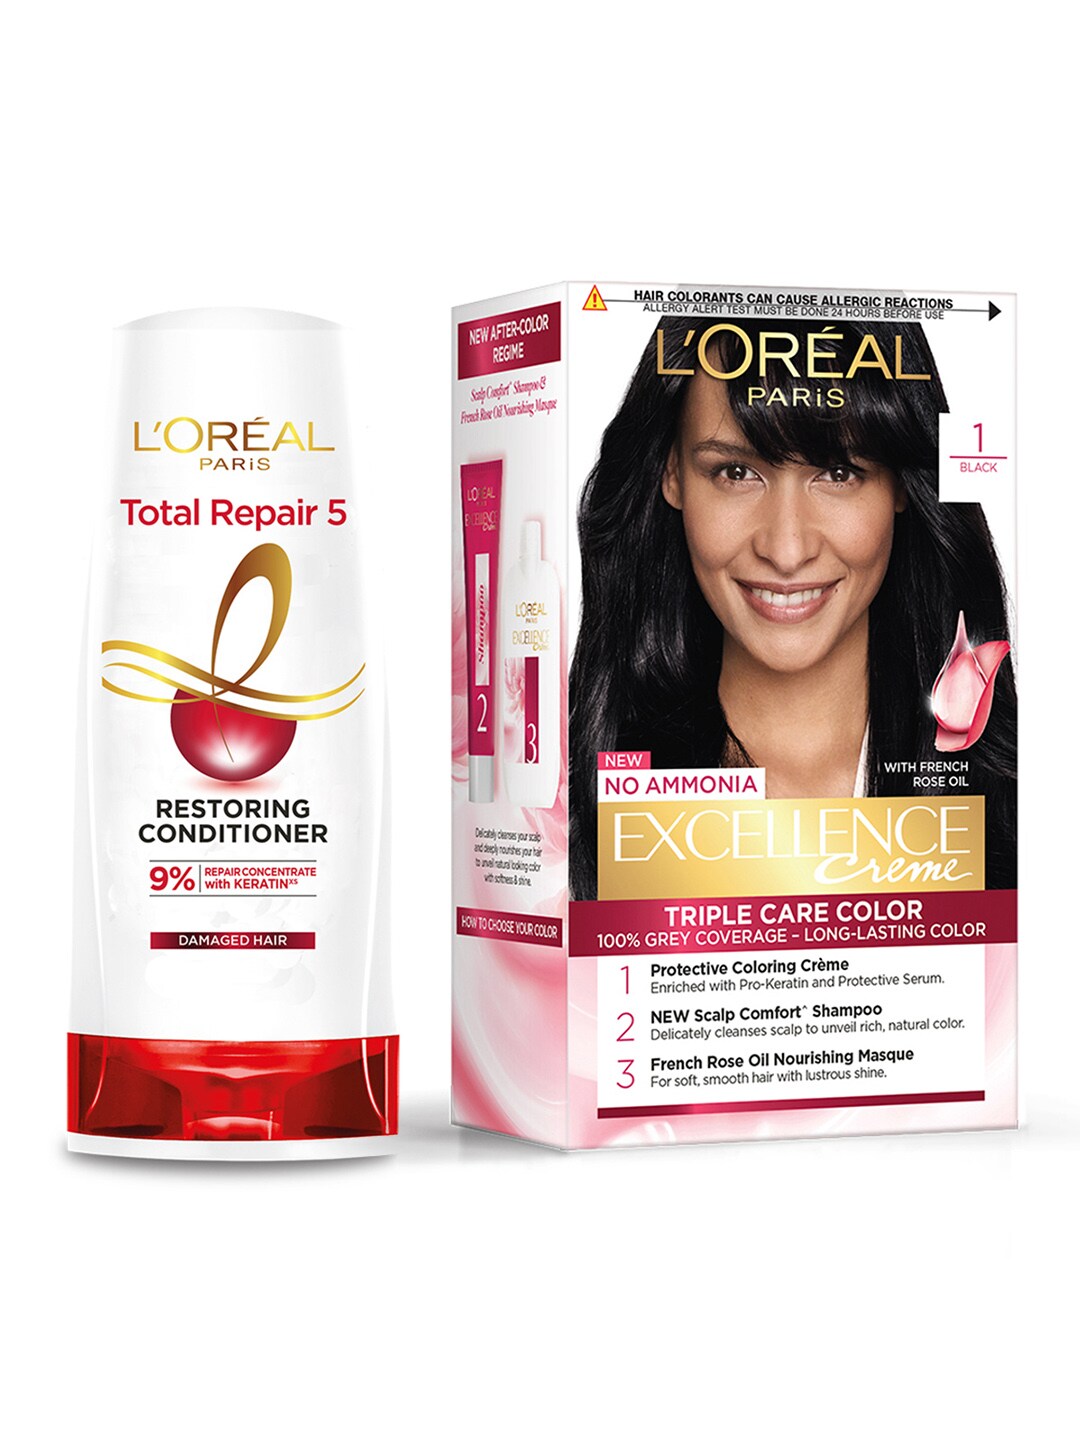 LOreal Paris Set of Total Repair 5 Hair Conditioner & Excellence Creme Hair Color - 01 Price in India